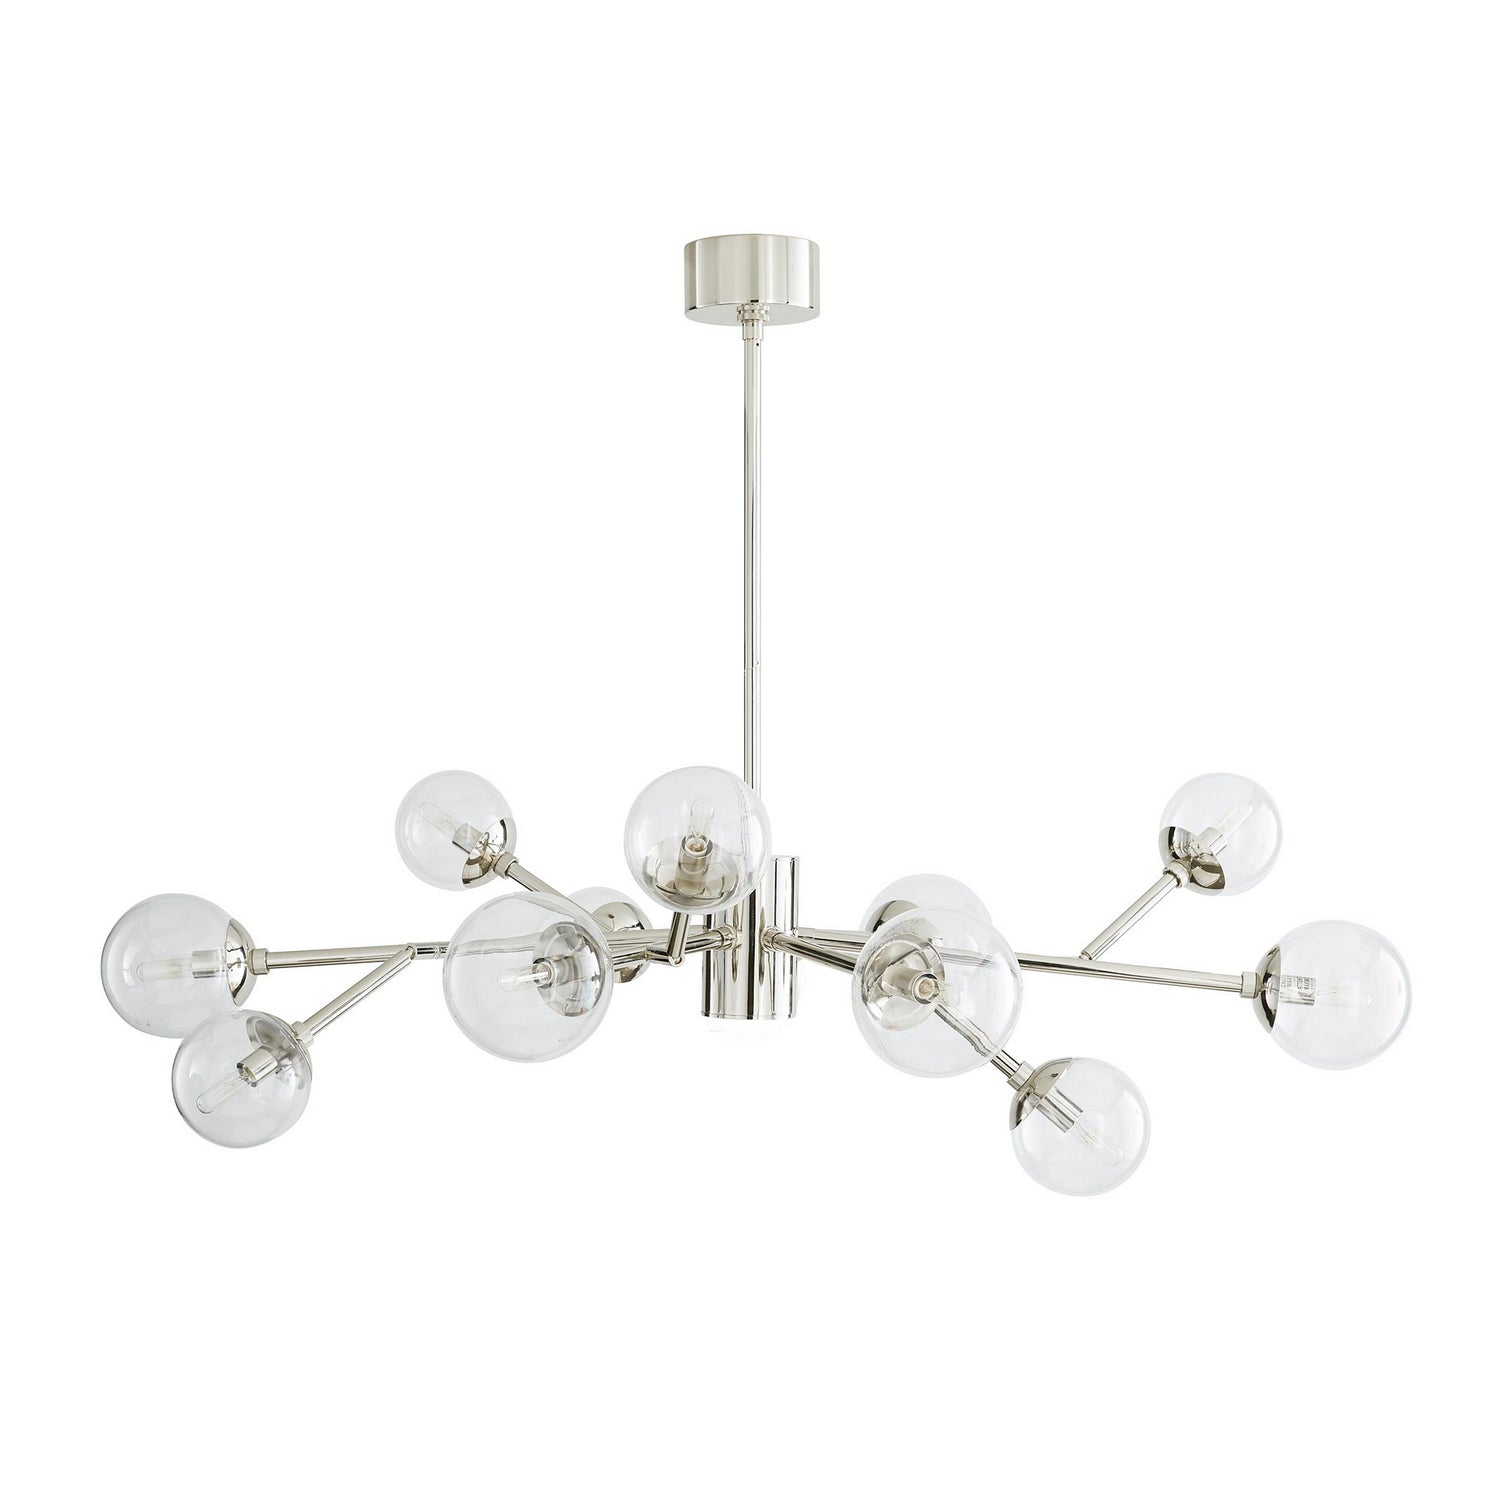 12 Light Chandelier from the Dallas collection in Polished Nickel finish